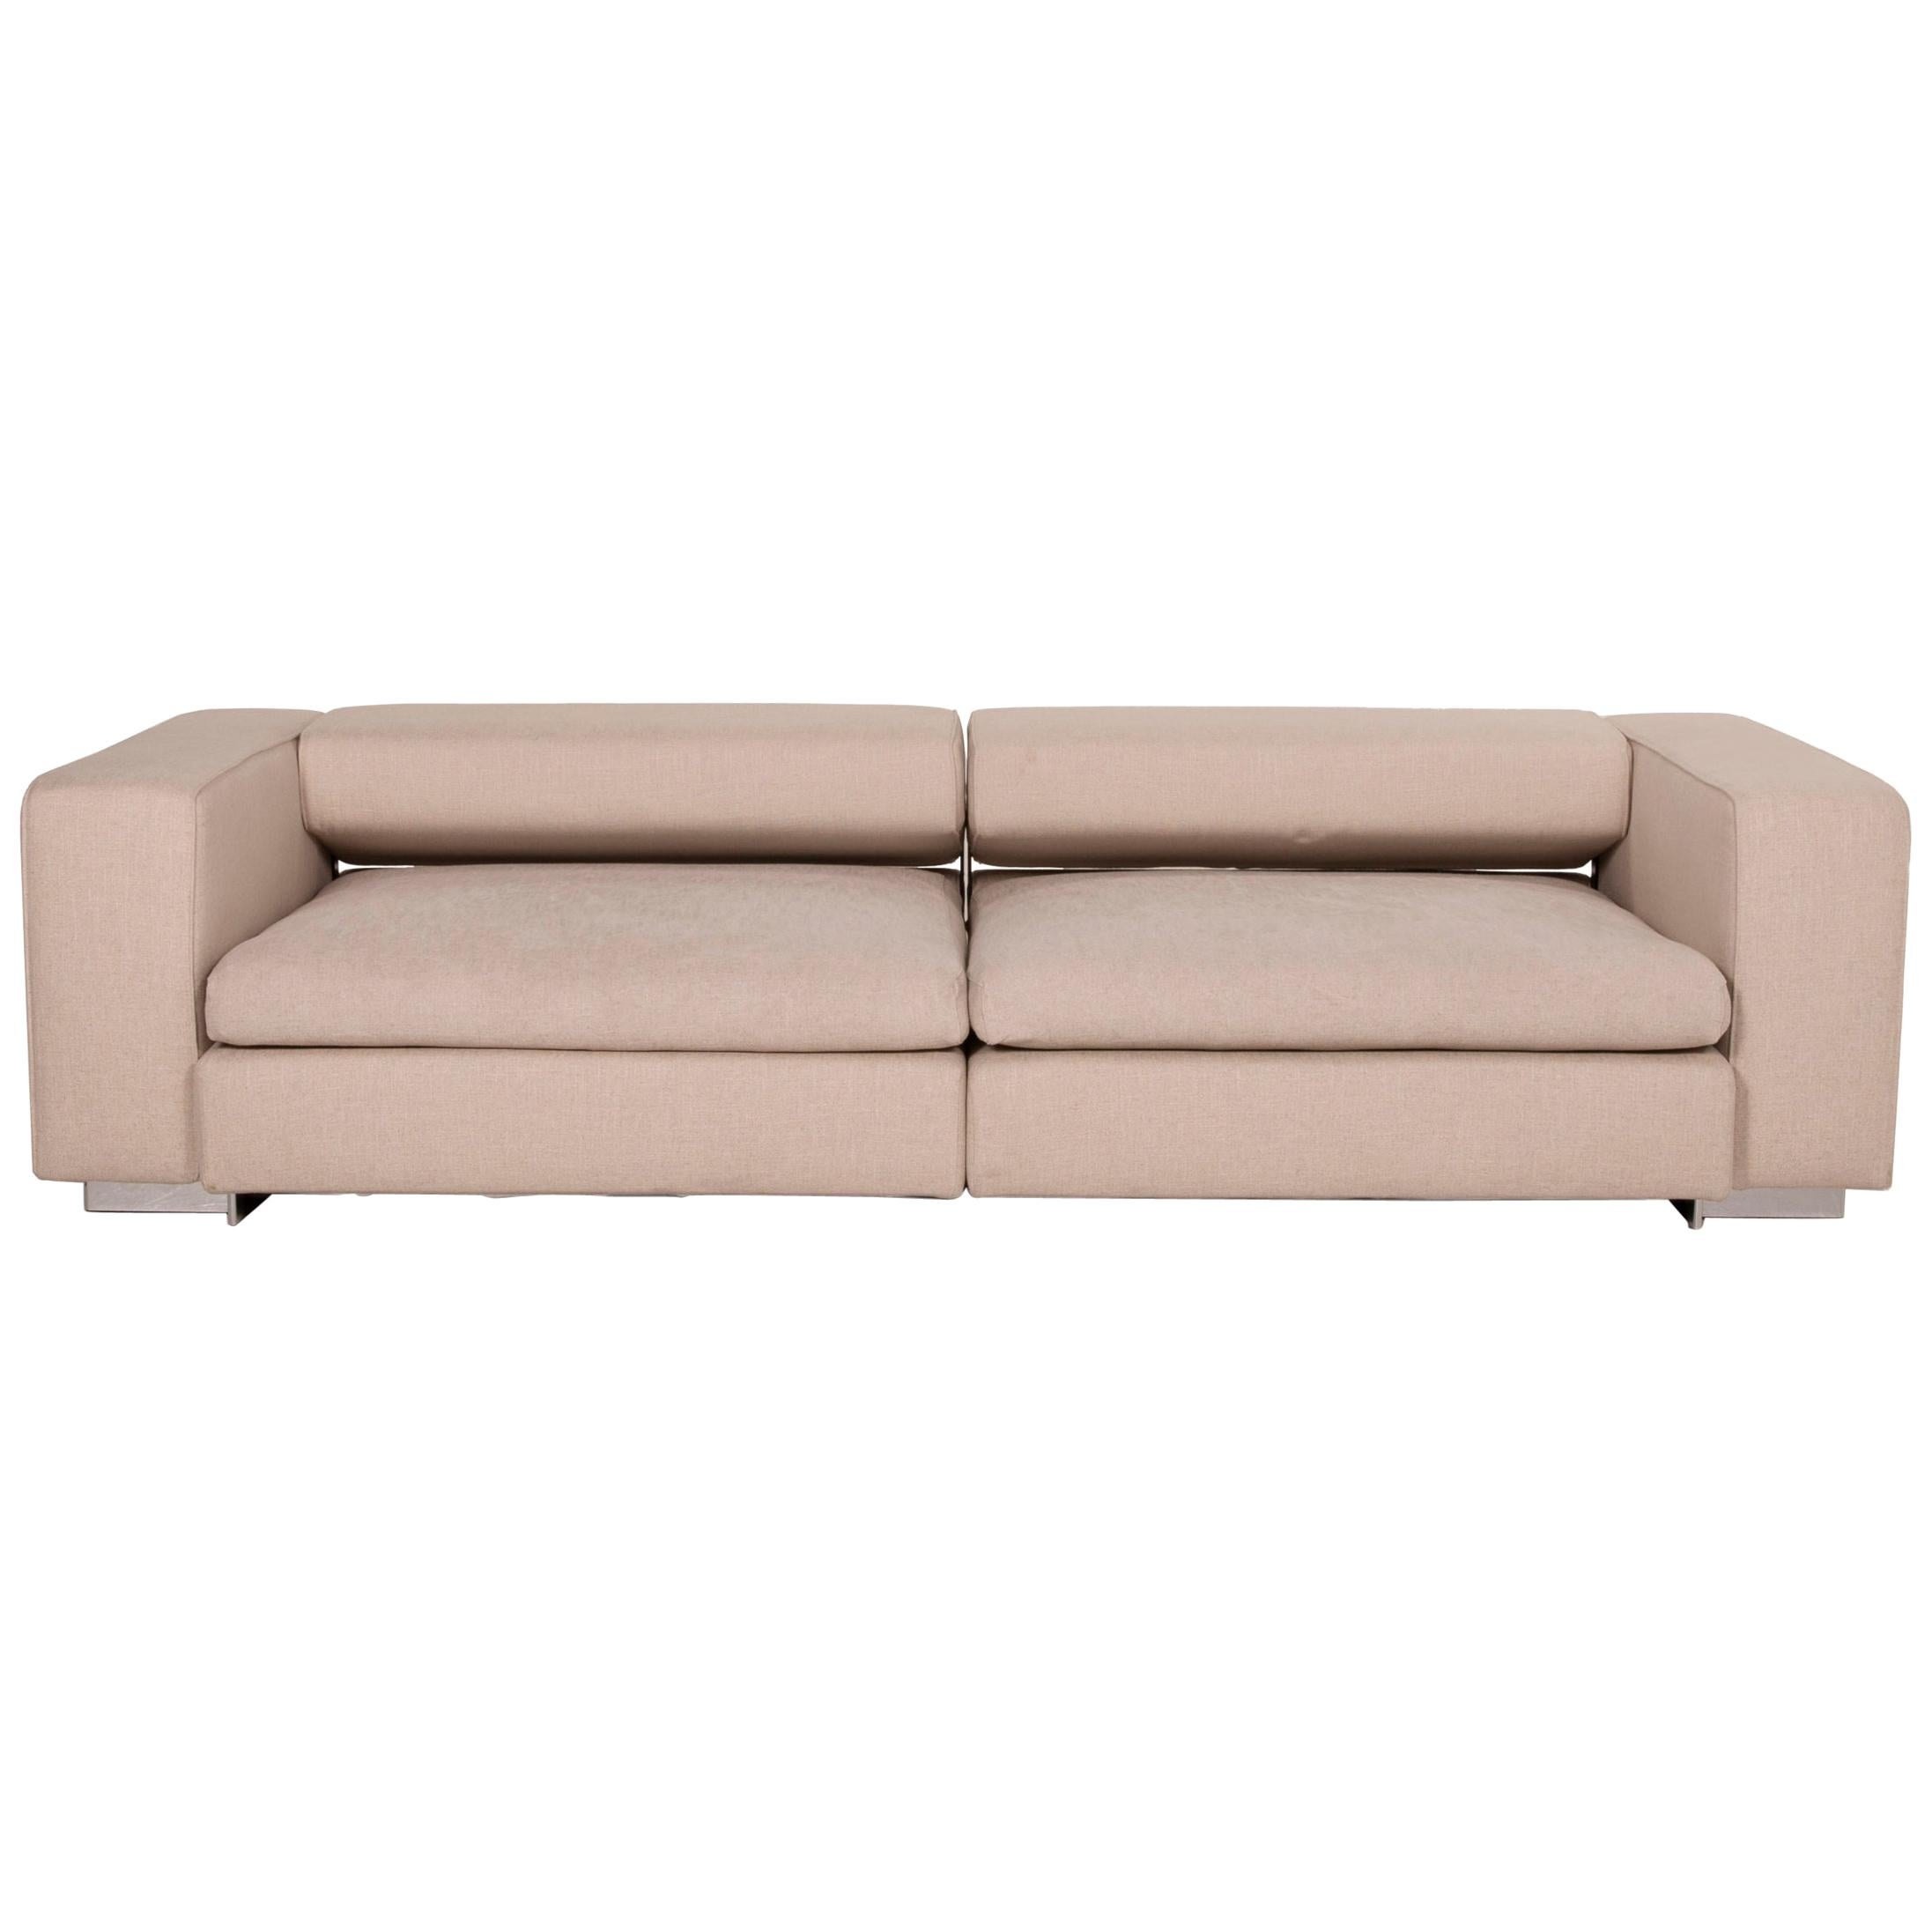 Molteni Turner Fabric Sofa Beige Two-Seater Function For Sale